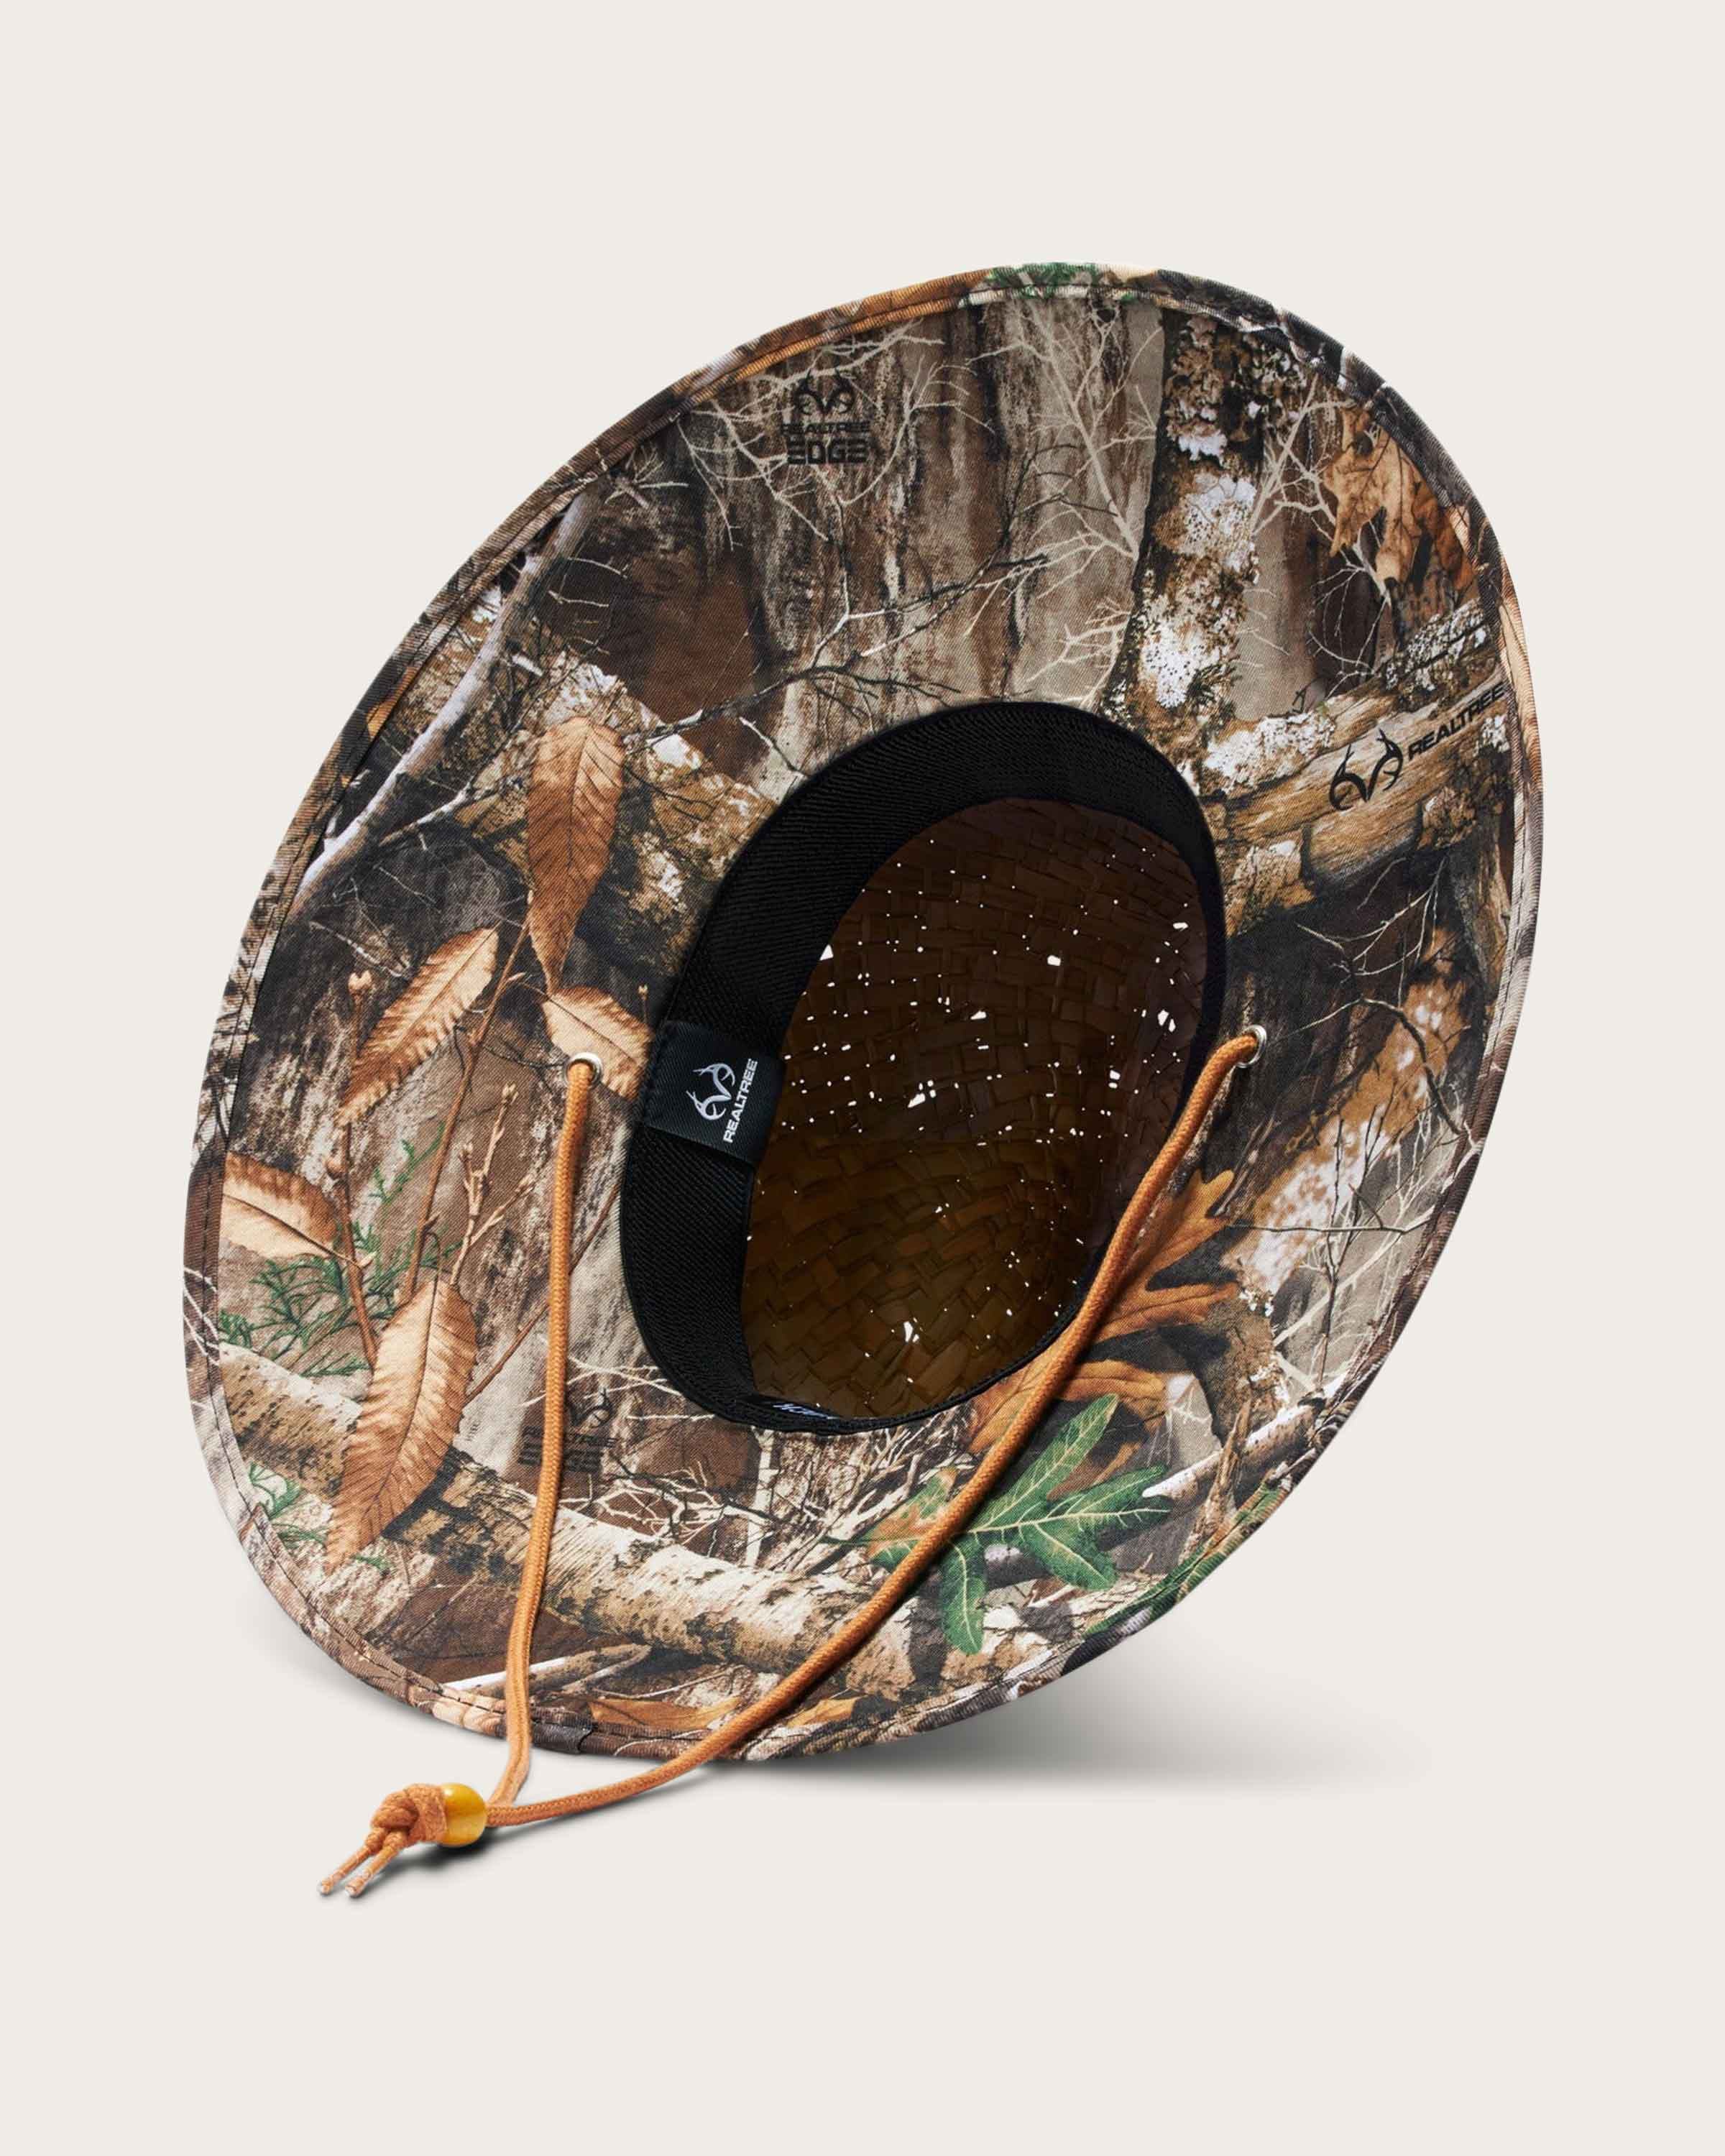 Gander - Realtree® Camo - undefined - Hemlock Hat Co. Lifeguards - Adults